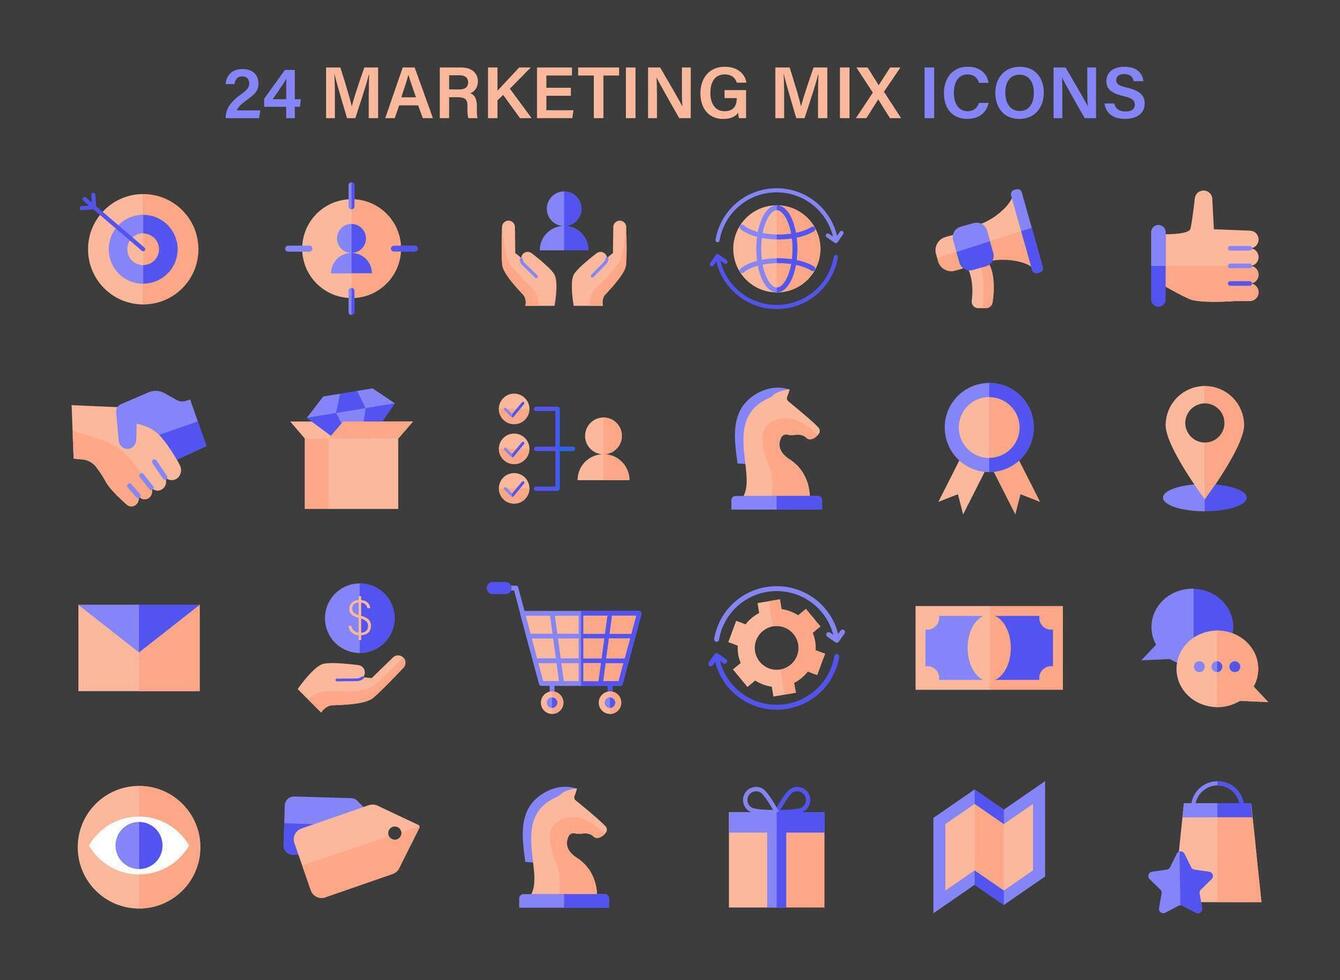 Marketing Mix icon set. Symbols represent strategic components like targeting, global reach, and customer service. vector